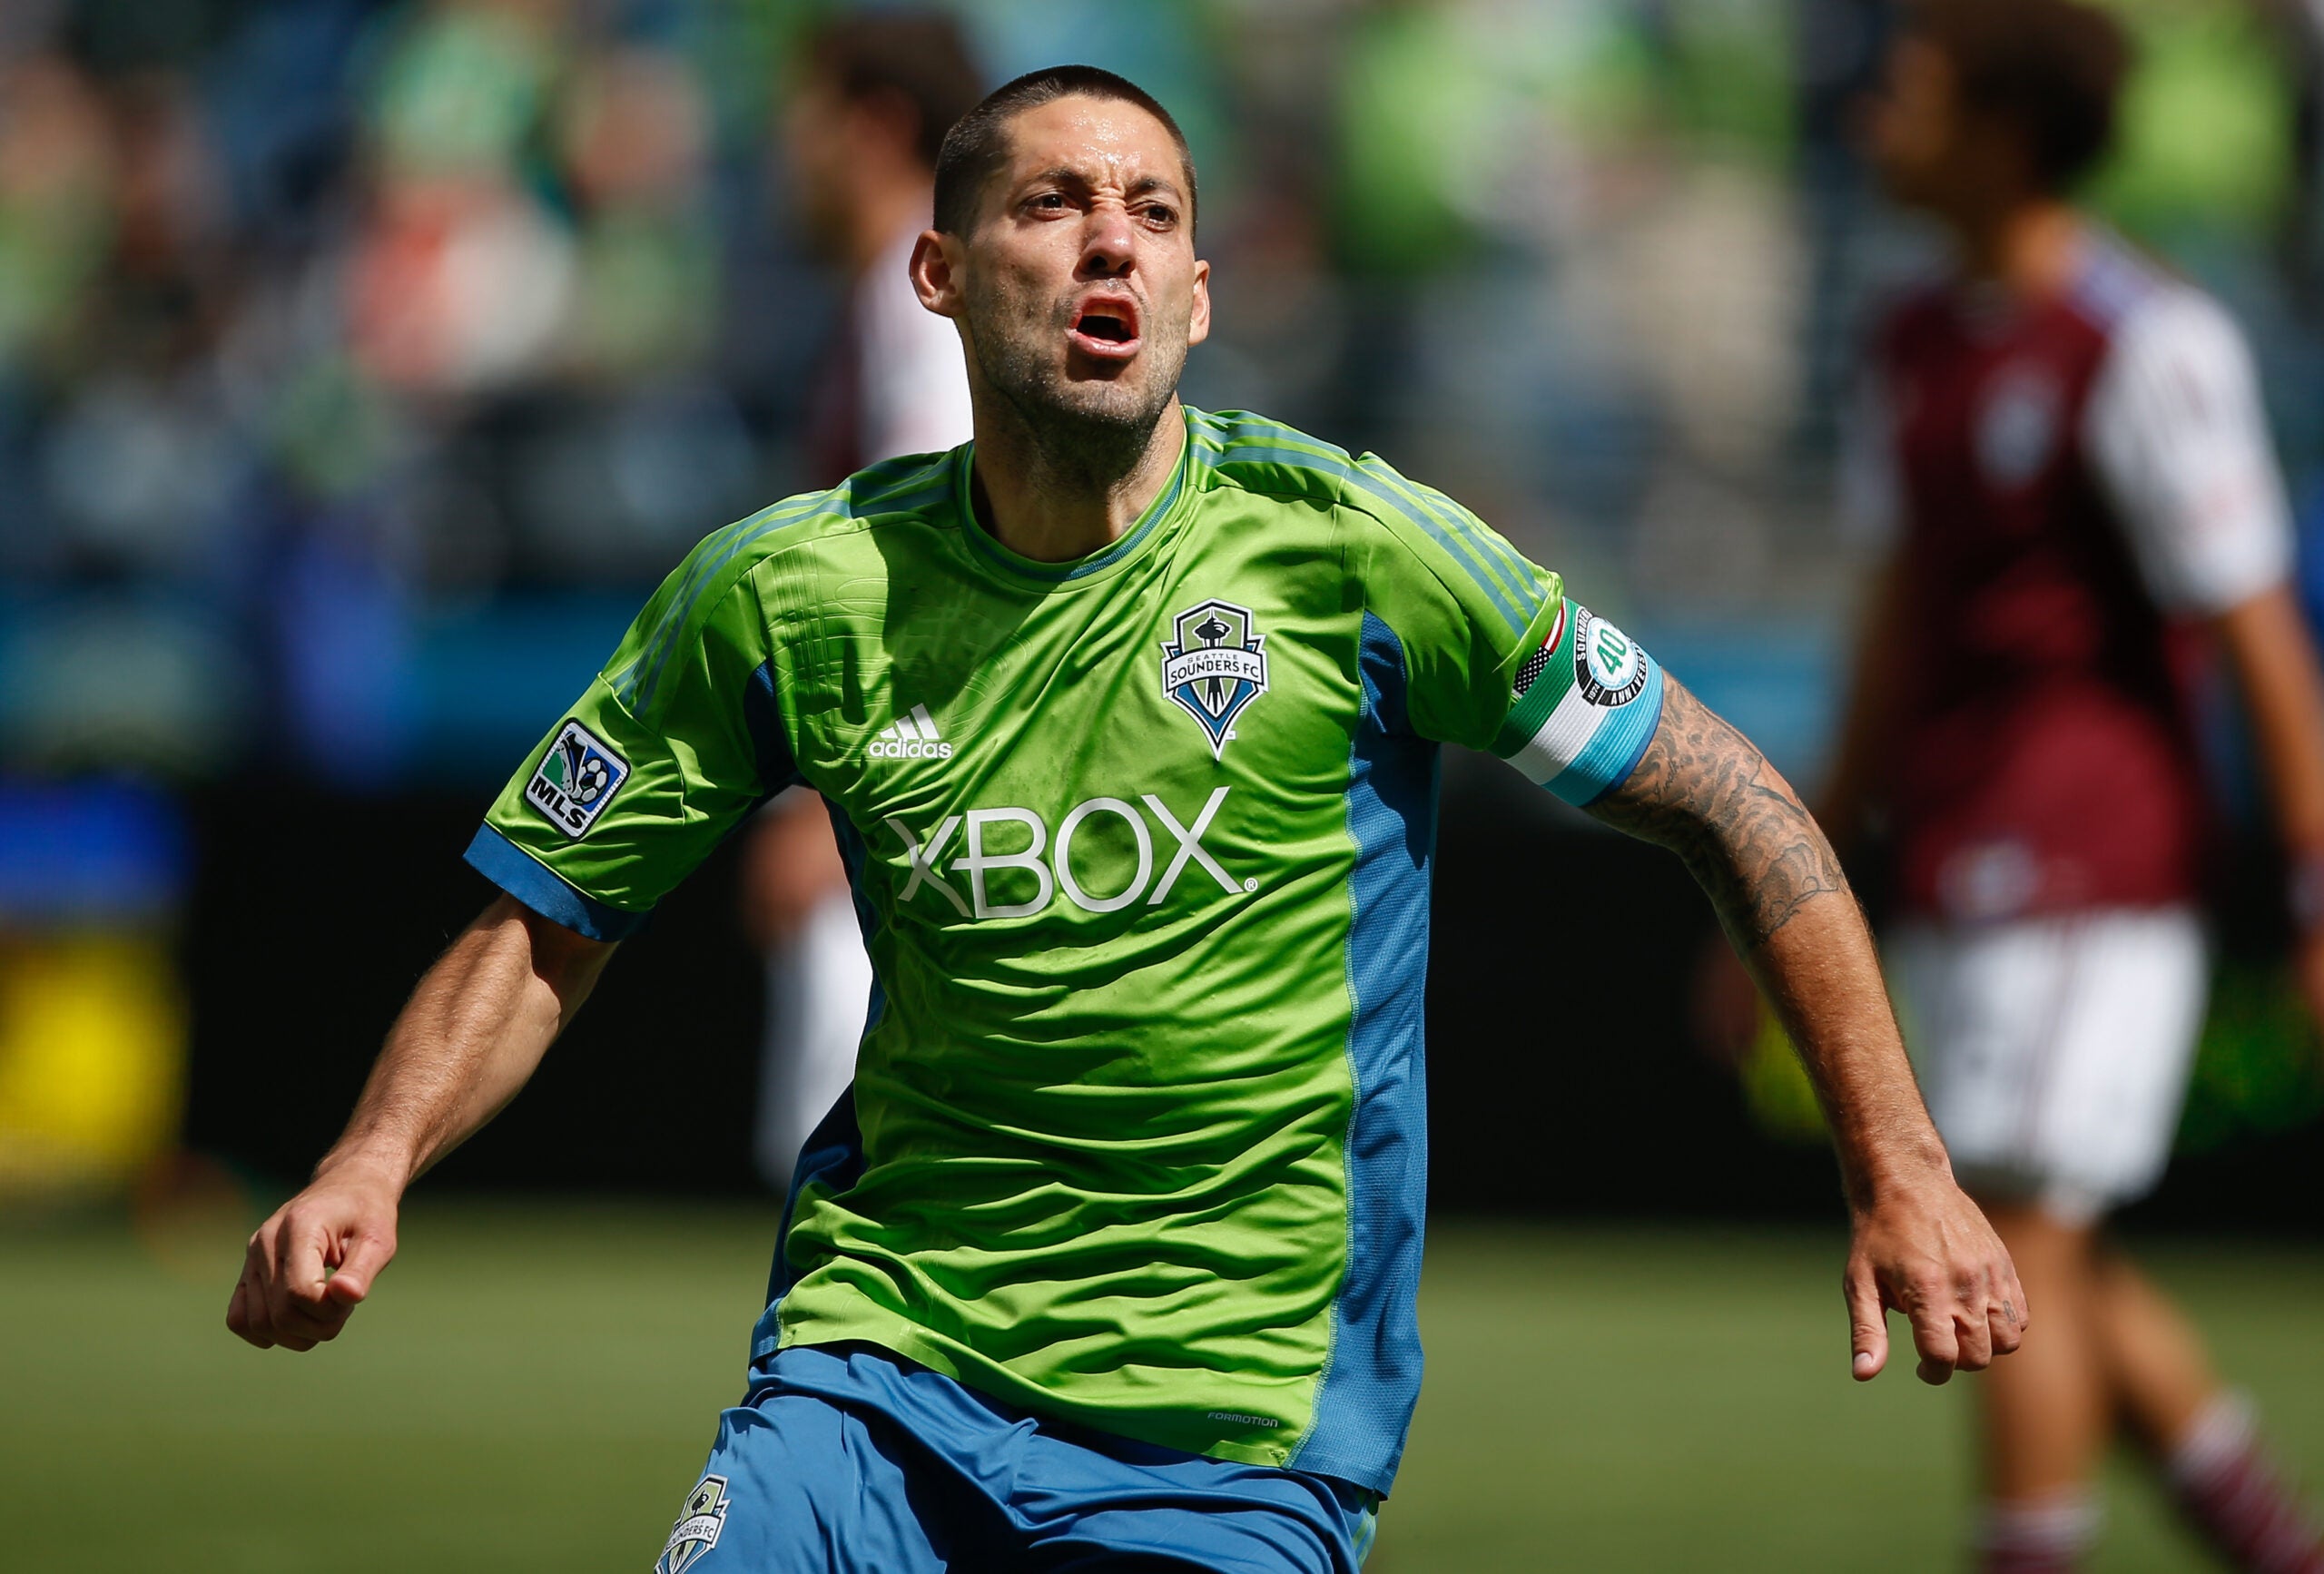 The World Cup: Clint Dempsey's Business Trip to Brazil